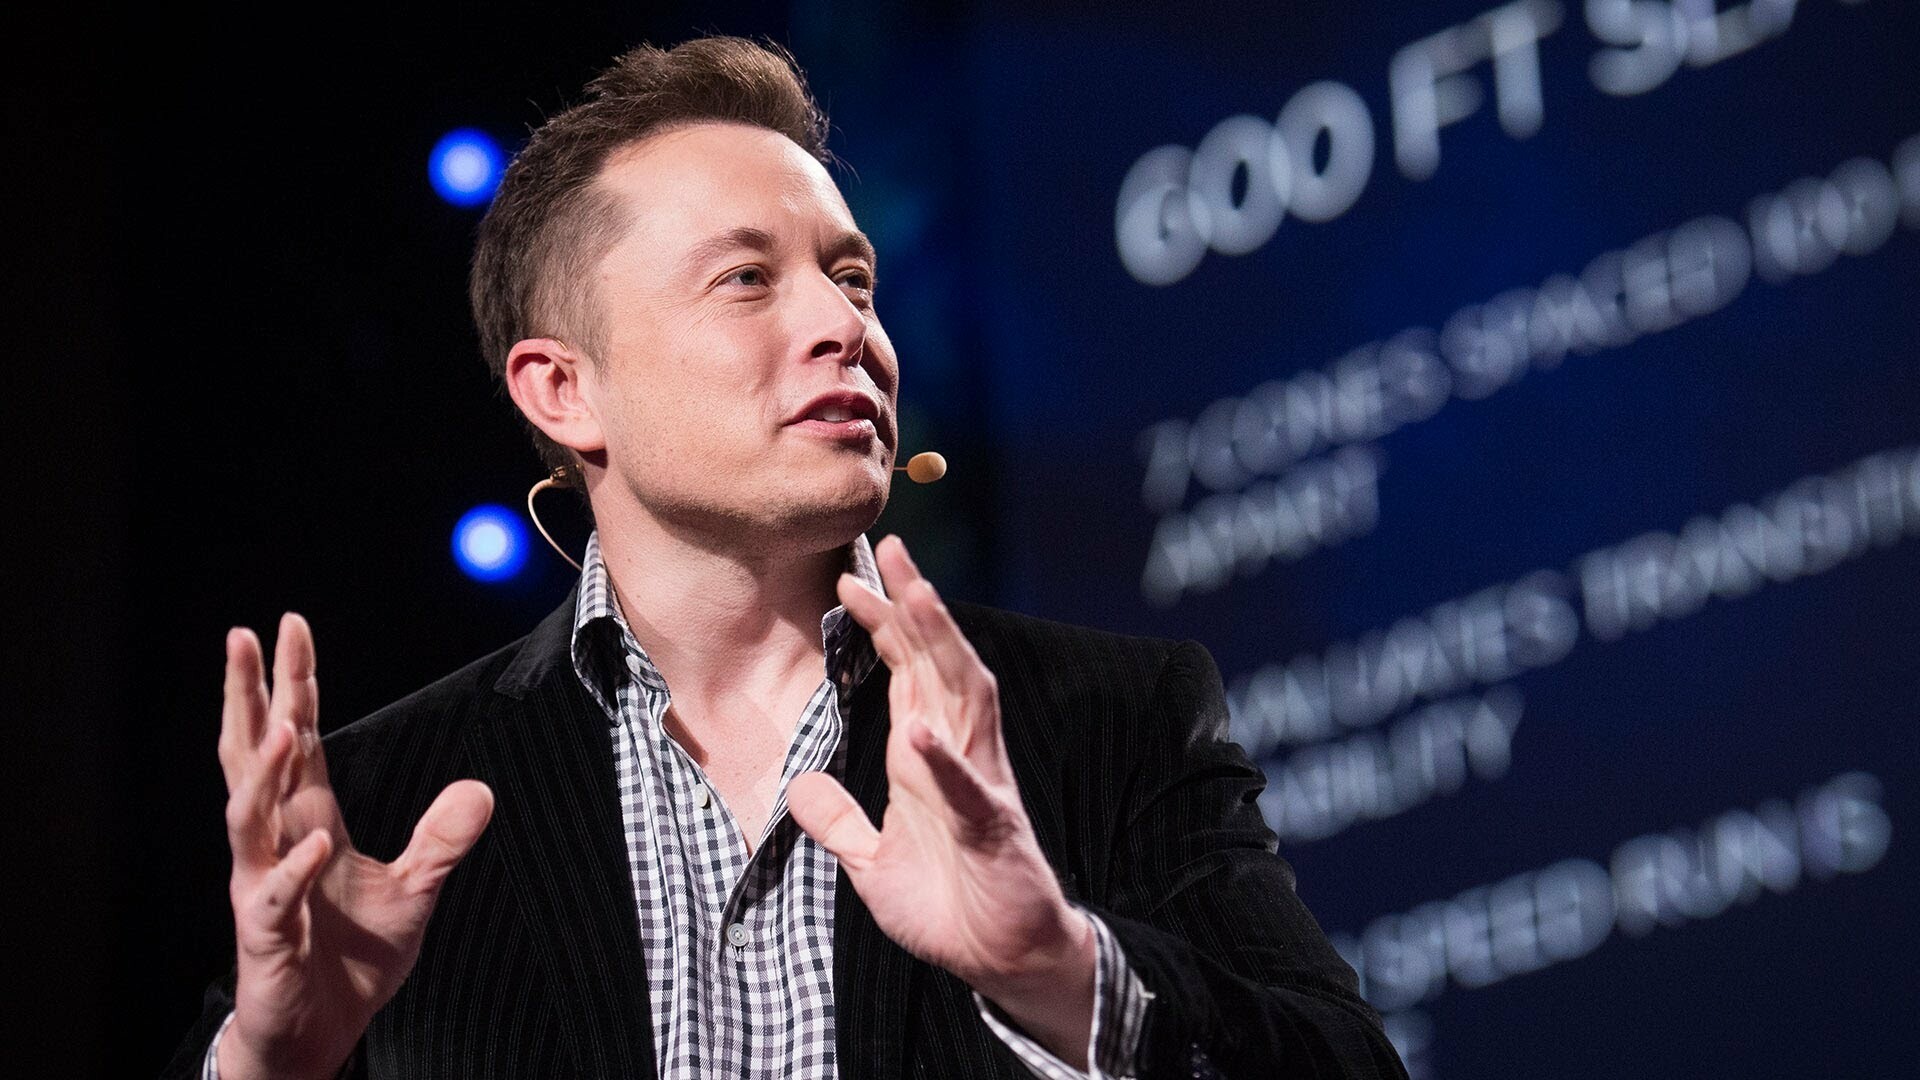 Elon Musk: An American entrepreneur who co-founded PayPal and established SpaceX. 1920x1080 Full HD Background.